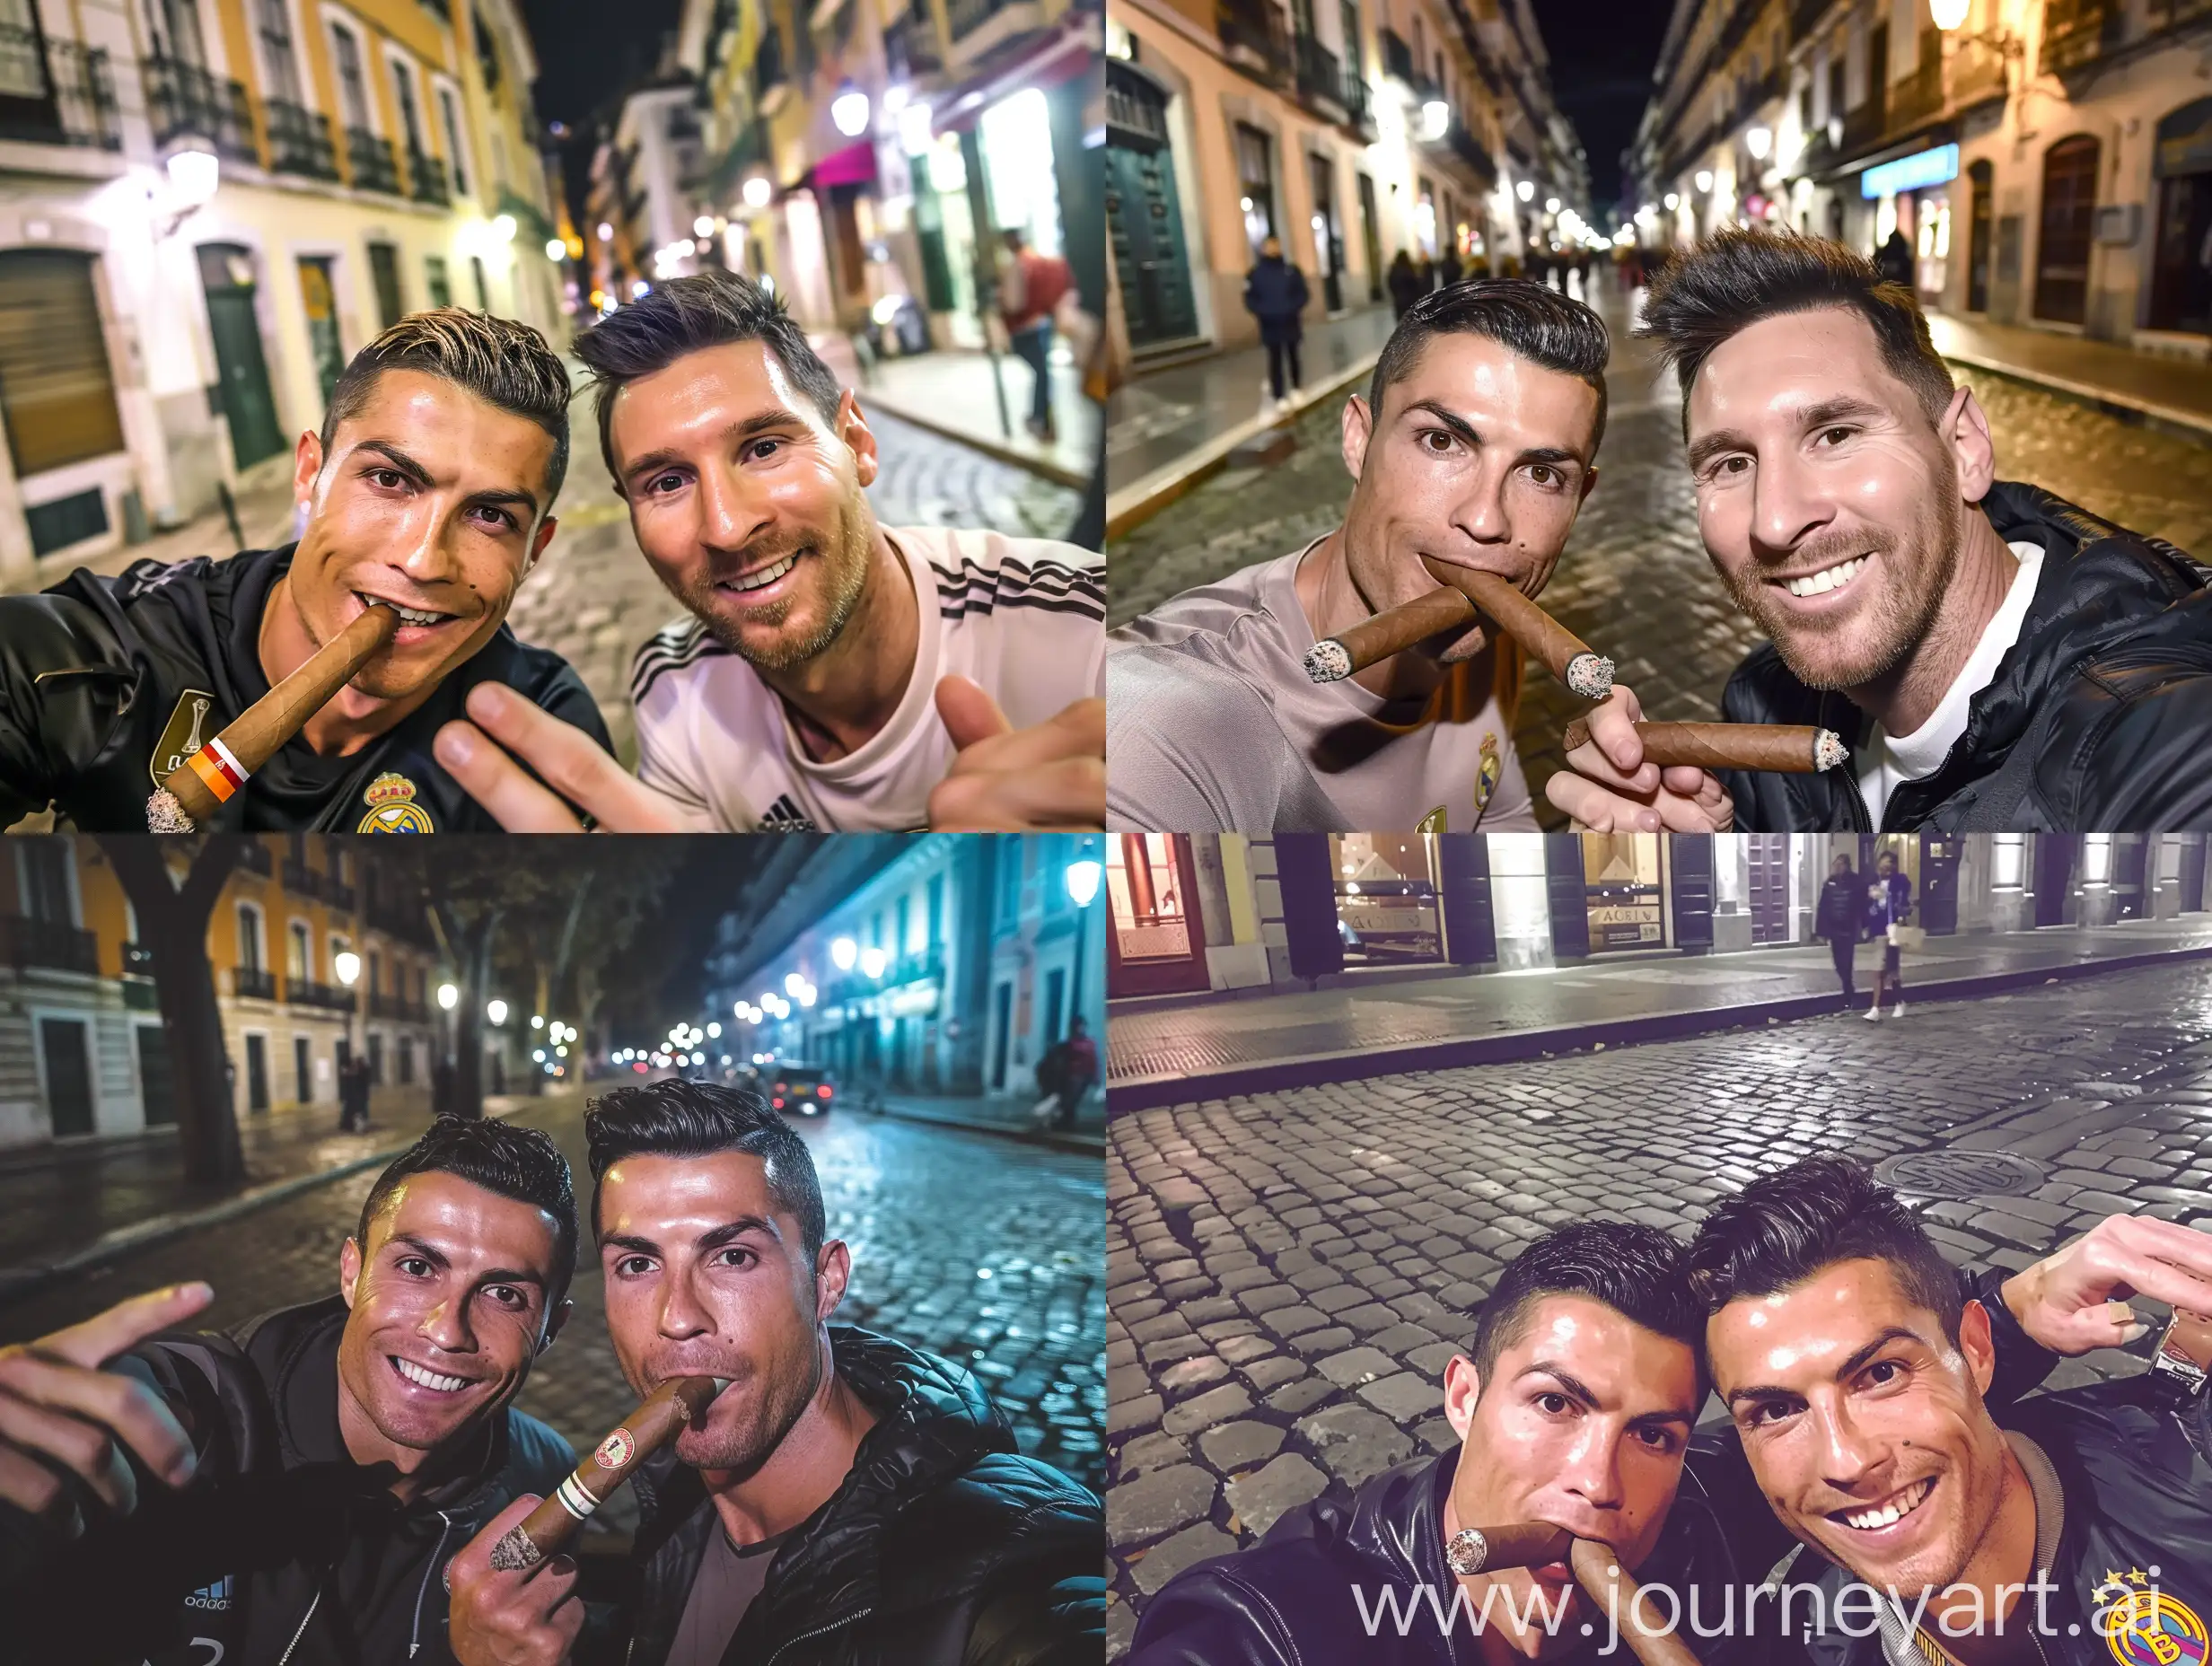 Cristiano-Ronaldo-and-Lionel-Messi-Posing-with-Cigars-in-Urban-Night-Setting